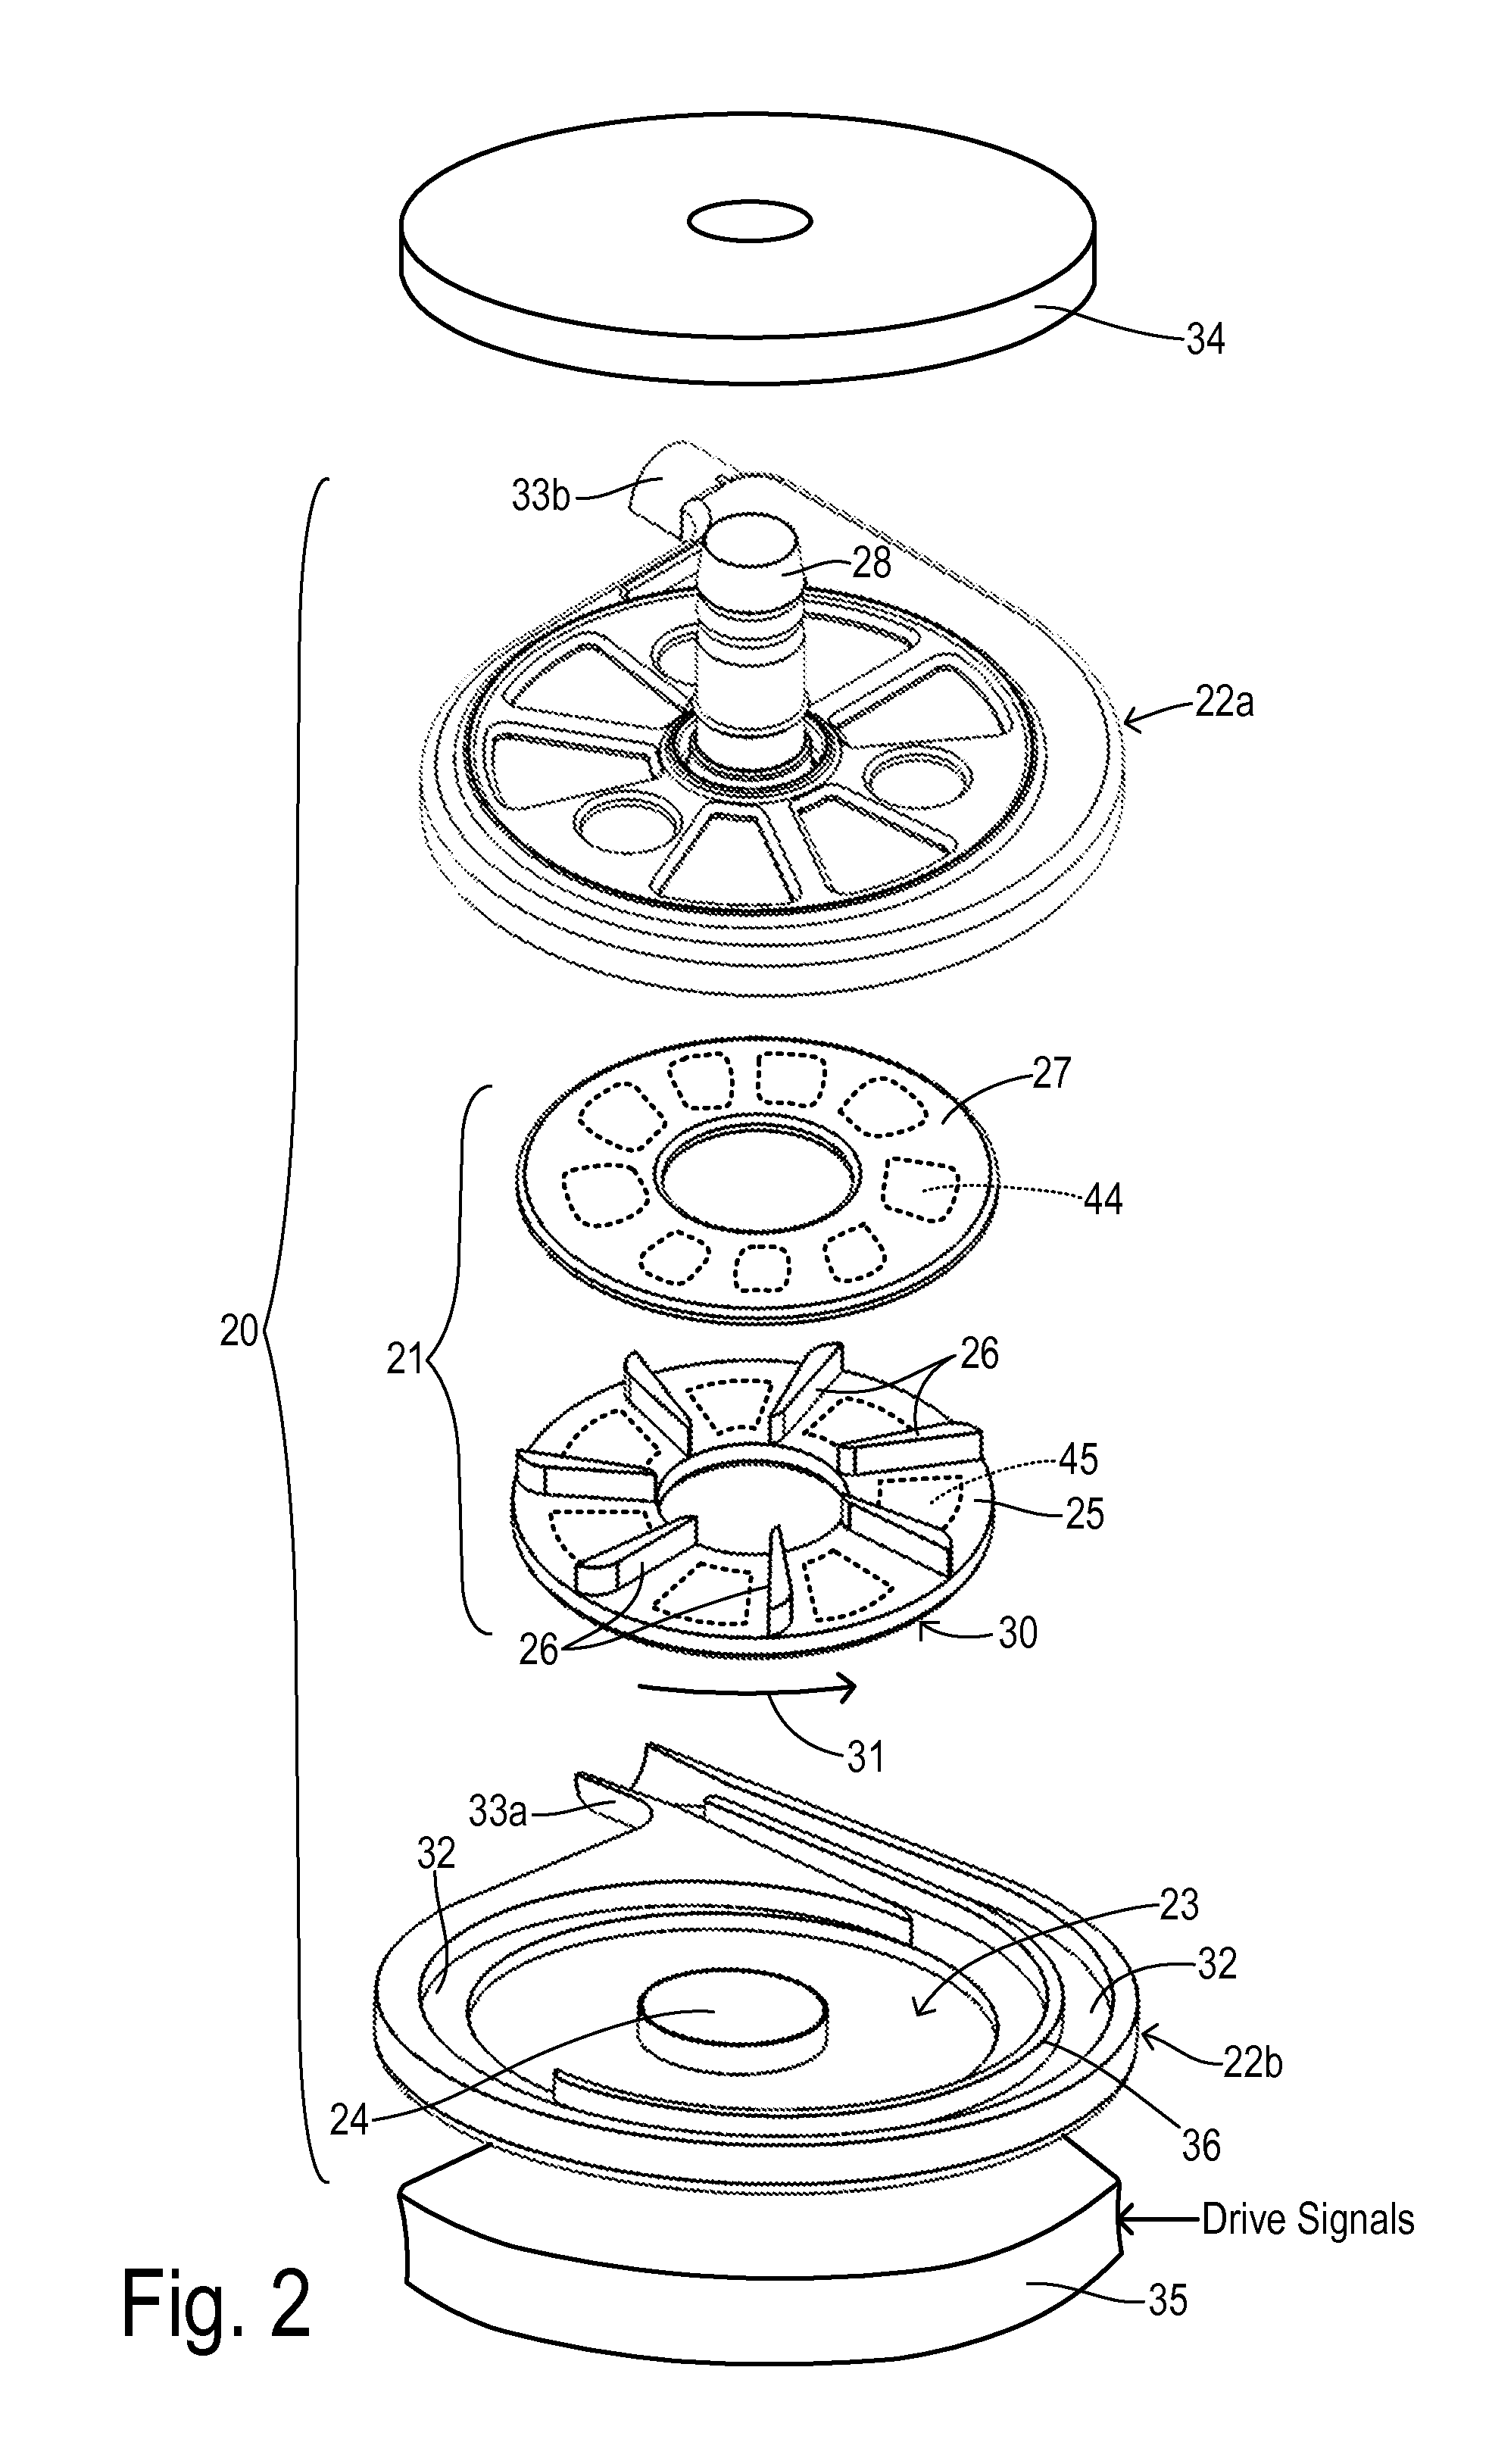 Impeller position compensation using field oriented control